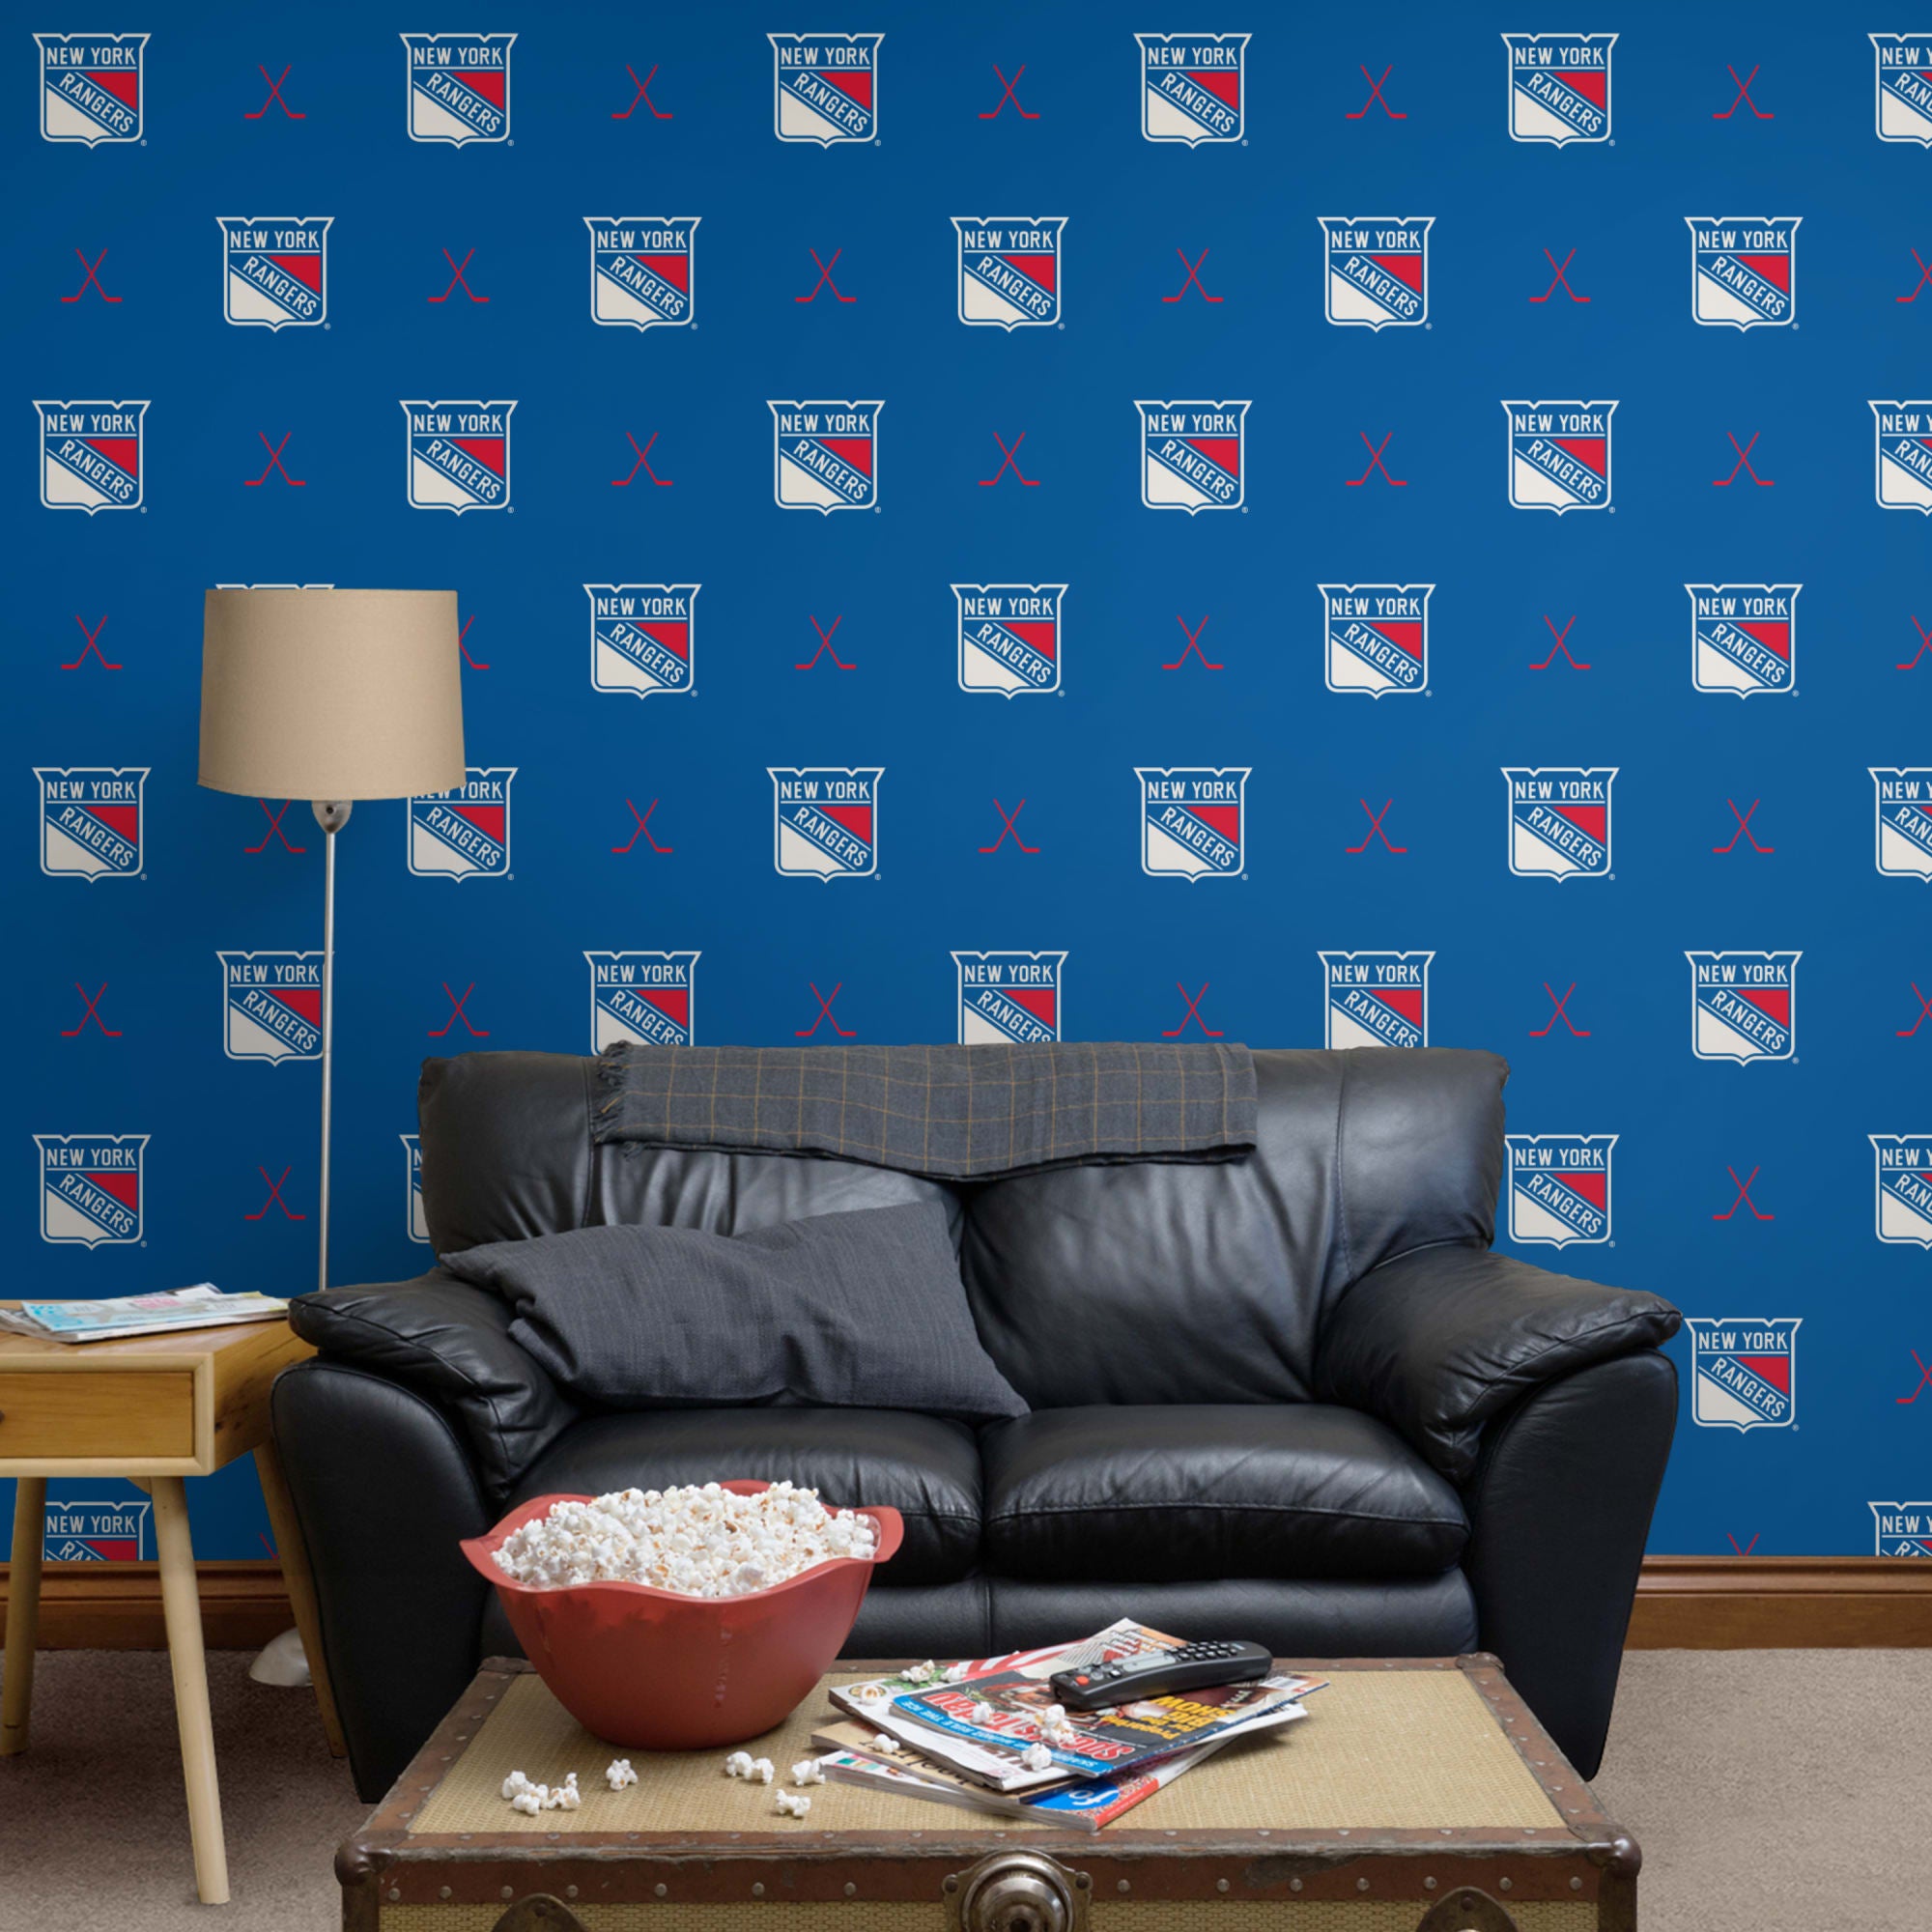 New York Rangers: Sticks Pattern - Officially Licensed NHL Removable Wallpaper 12" x 12" Sample by Fathead | 100% Vinyl